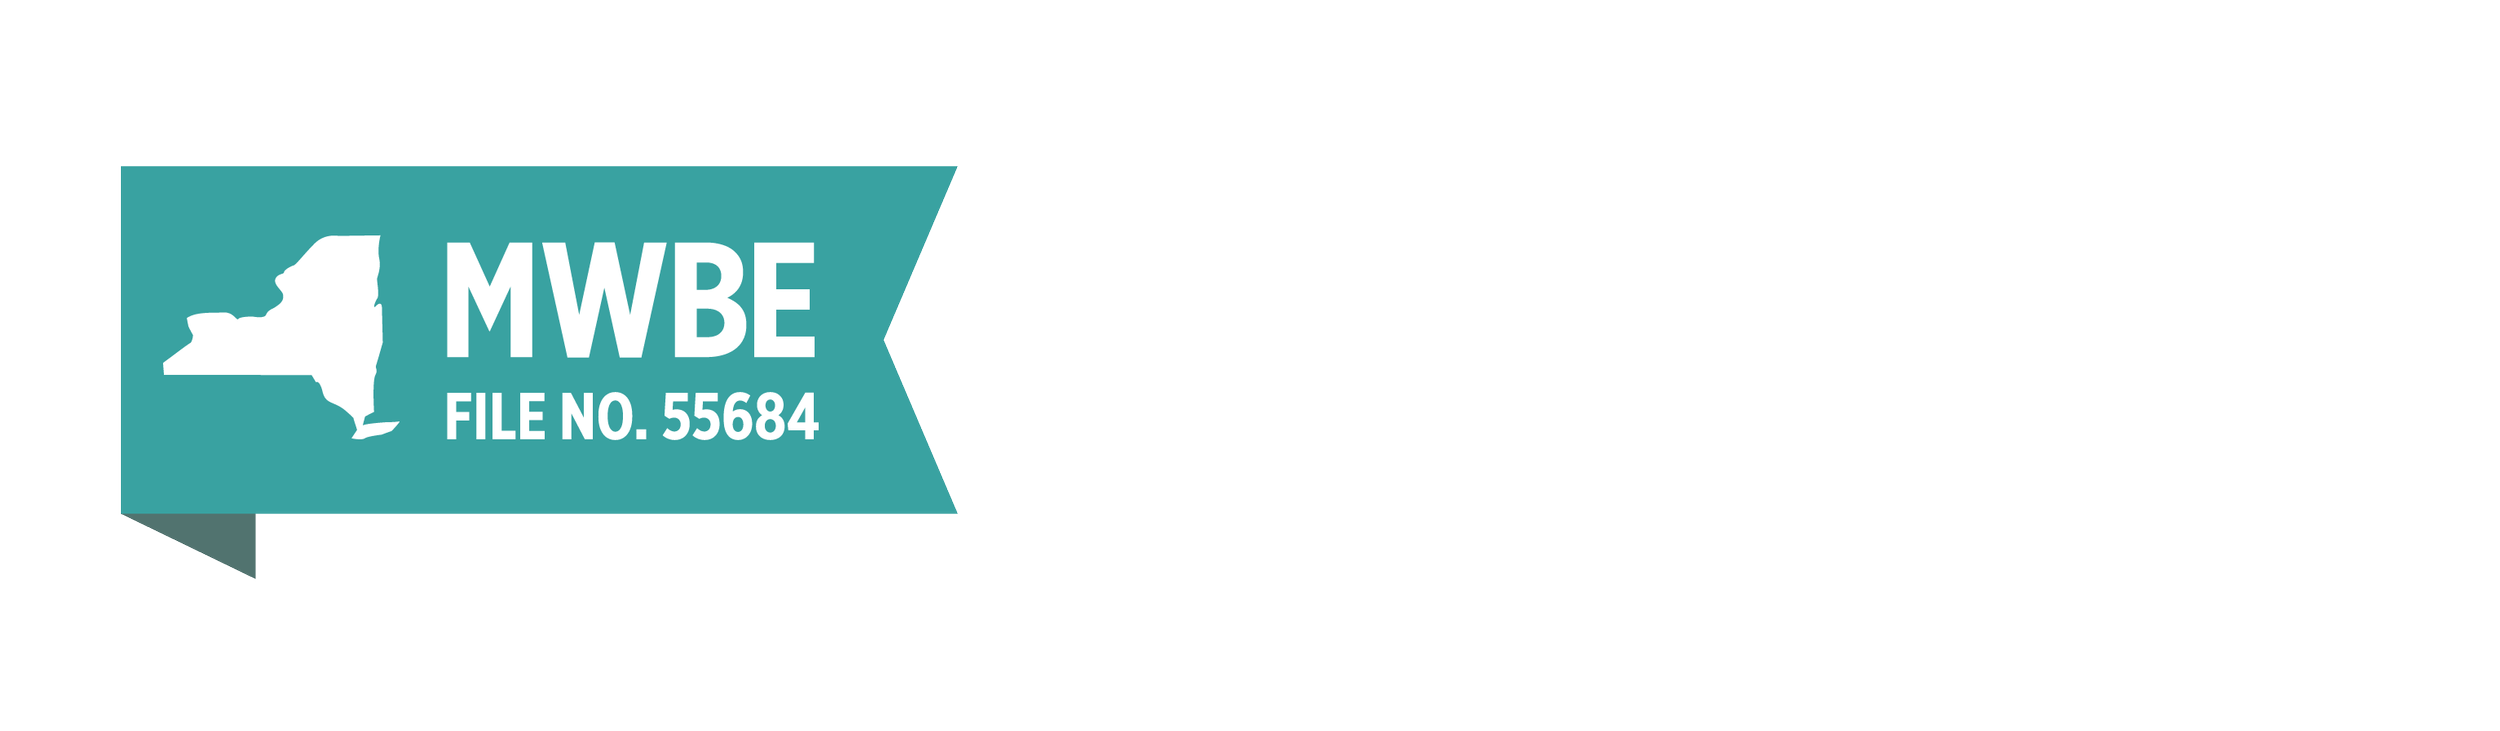 Woman-Owned Branding and Design Studio and Certified B Corp in